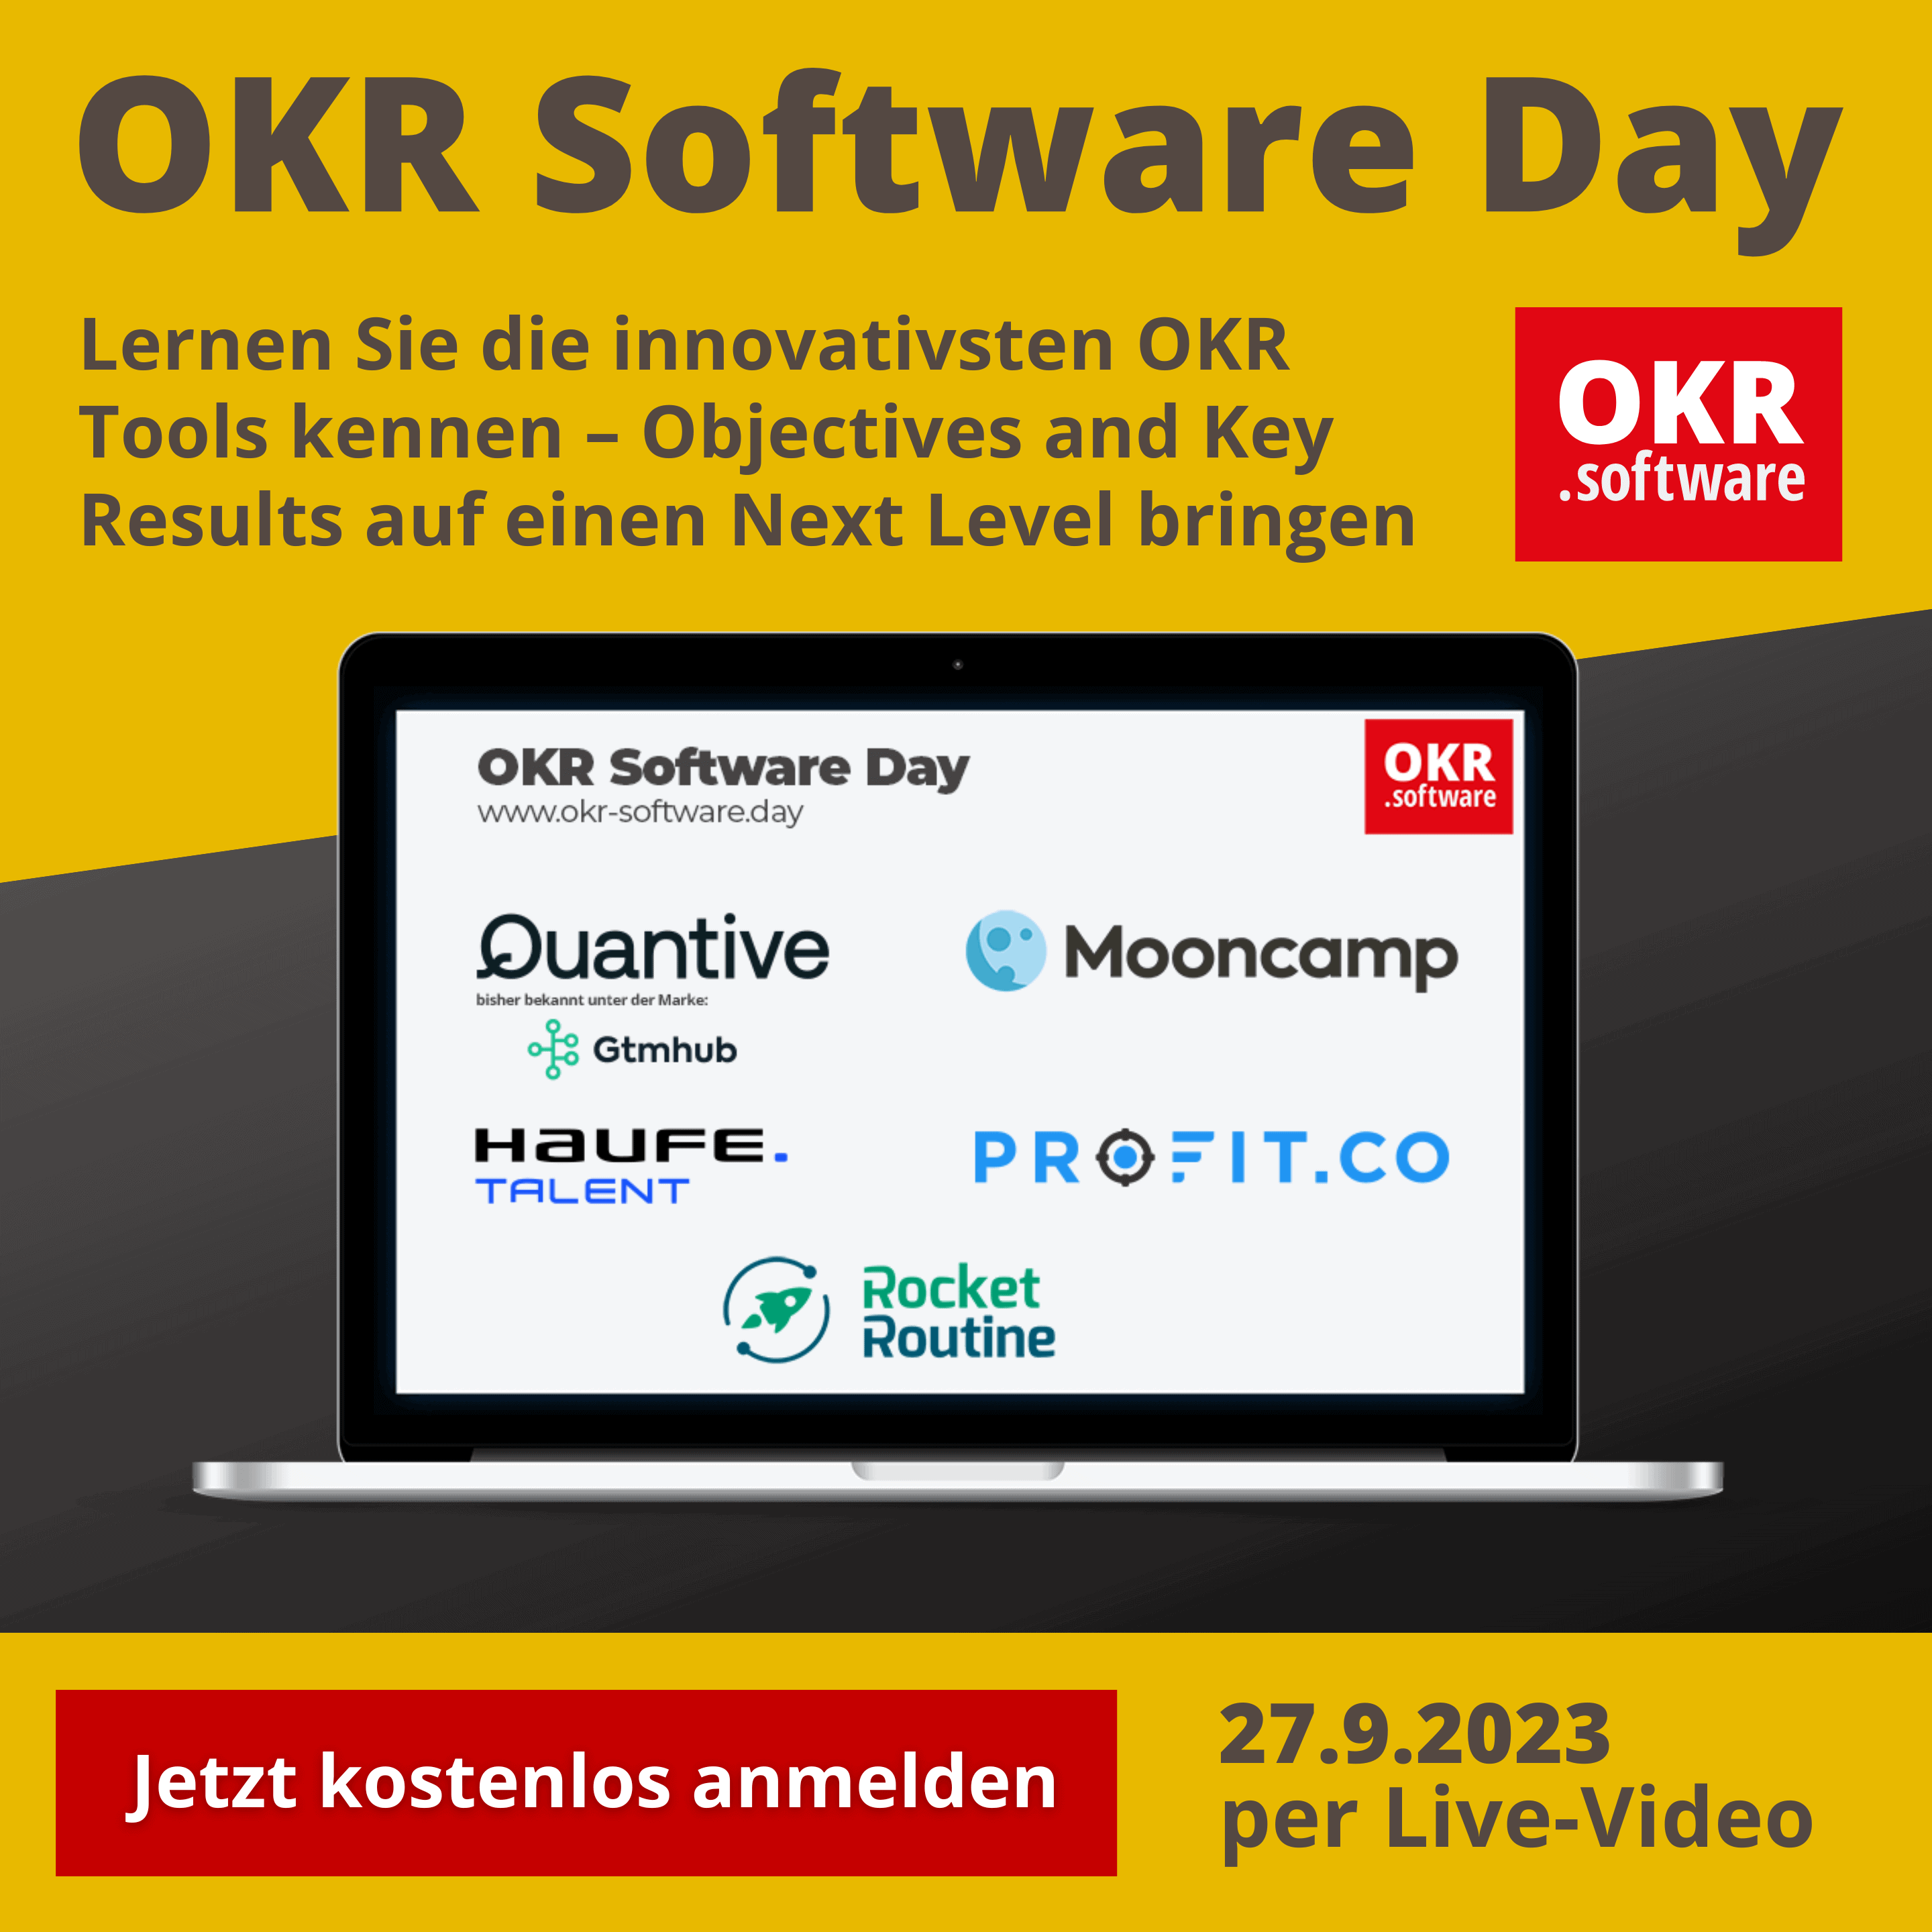 OKR Software Day